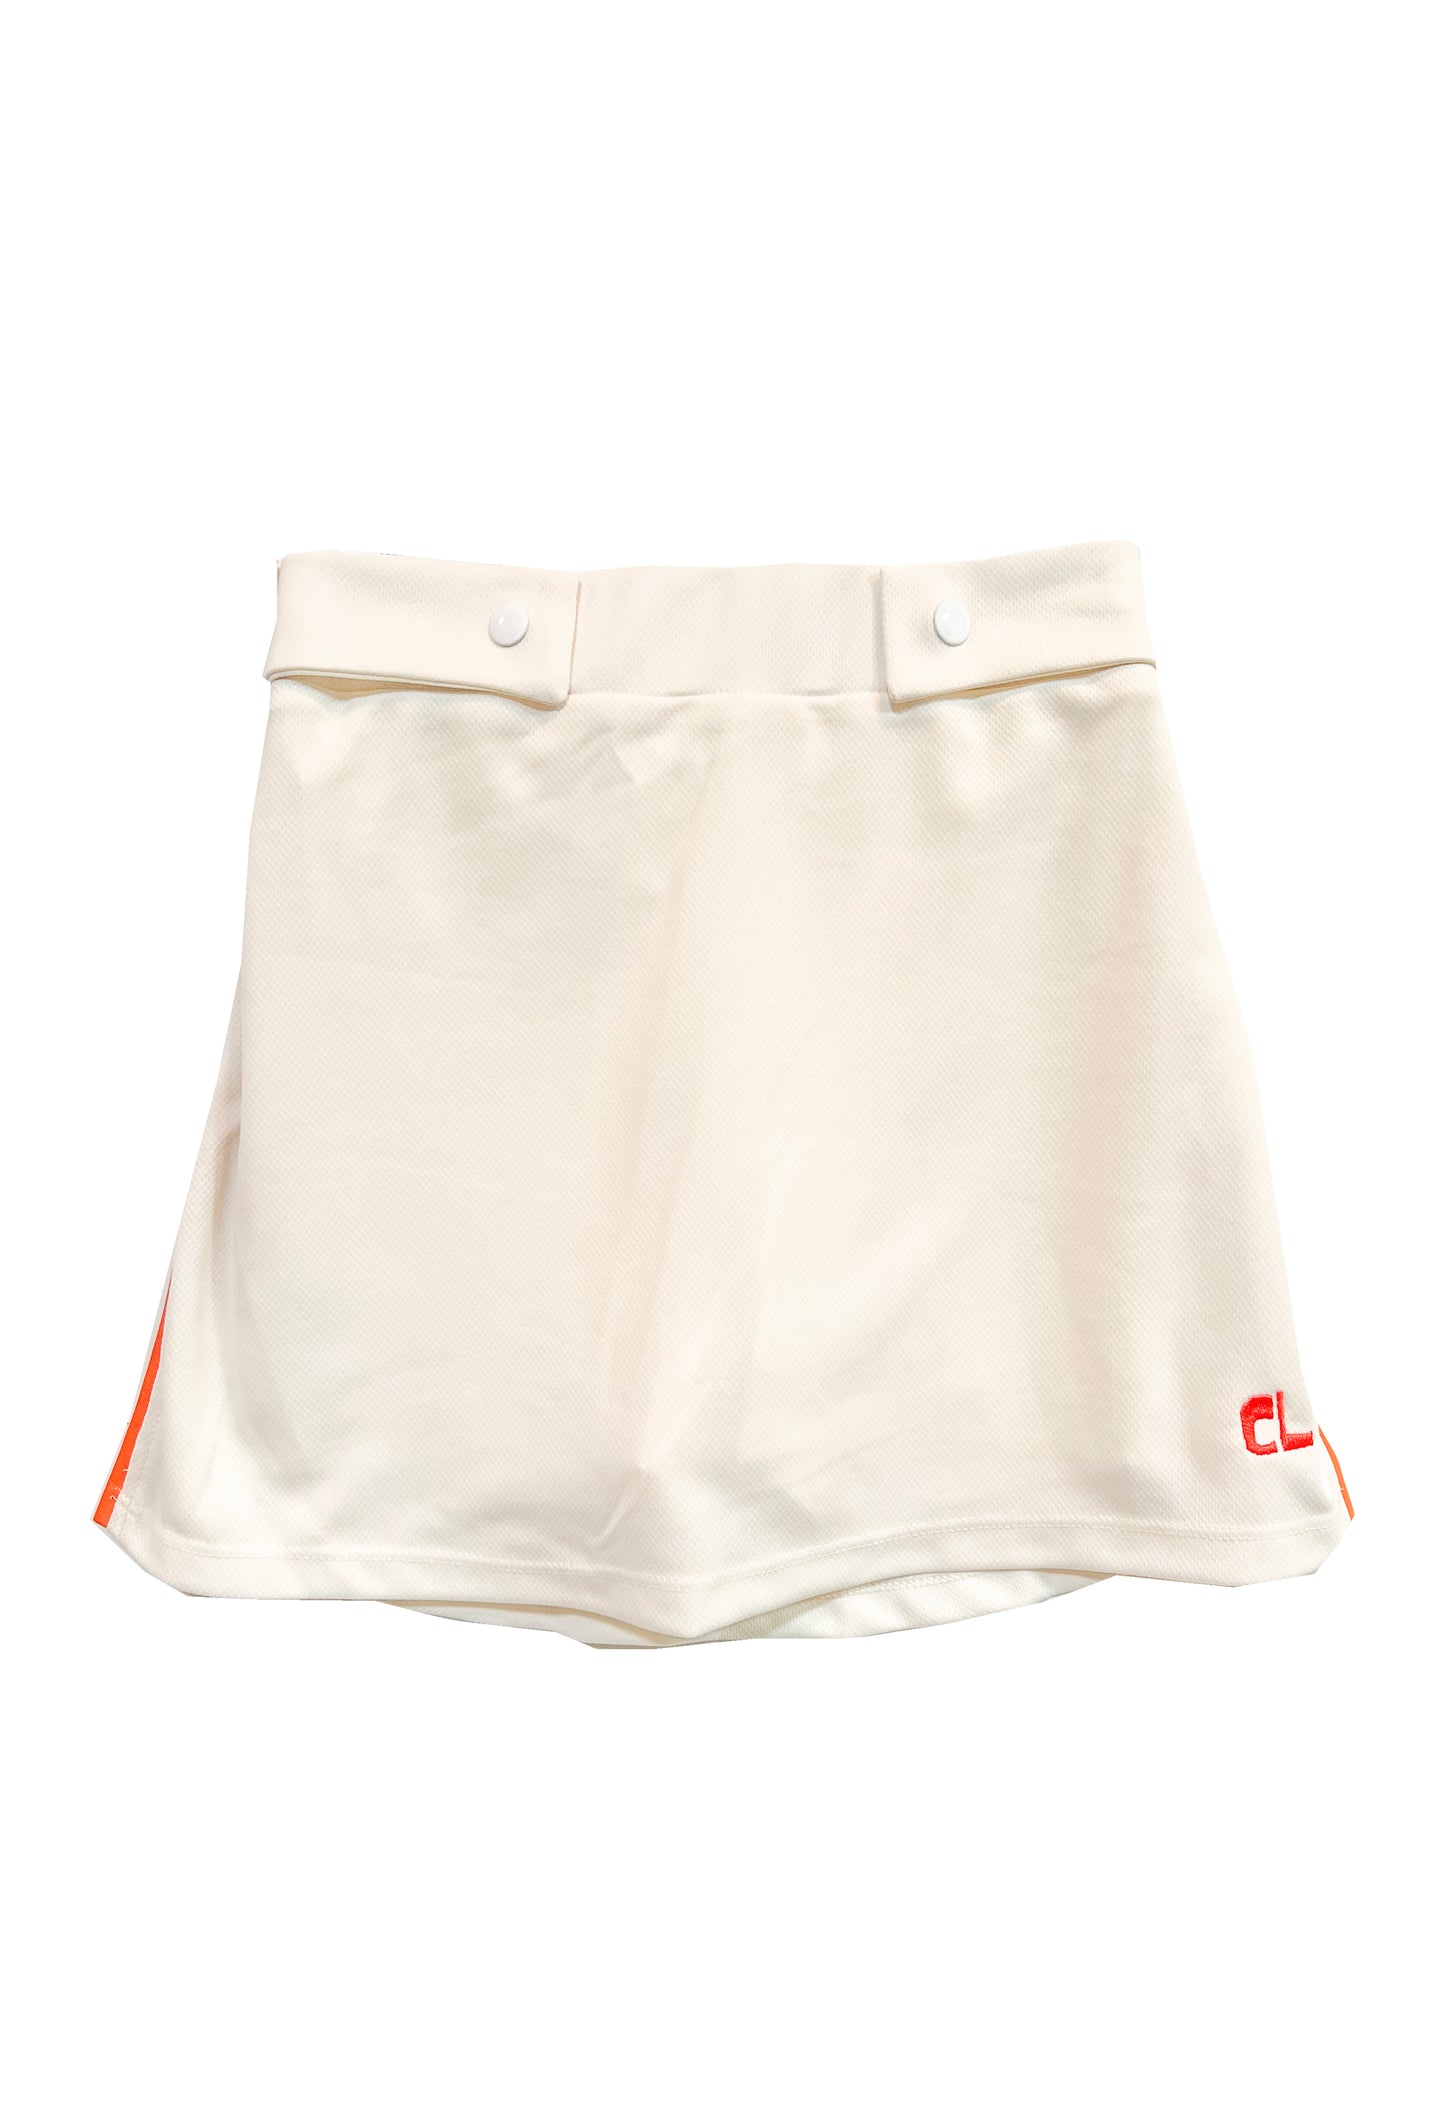 Ciao Lucia Tennis Skirt 3 Ivory/Clay